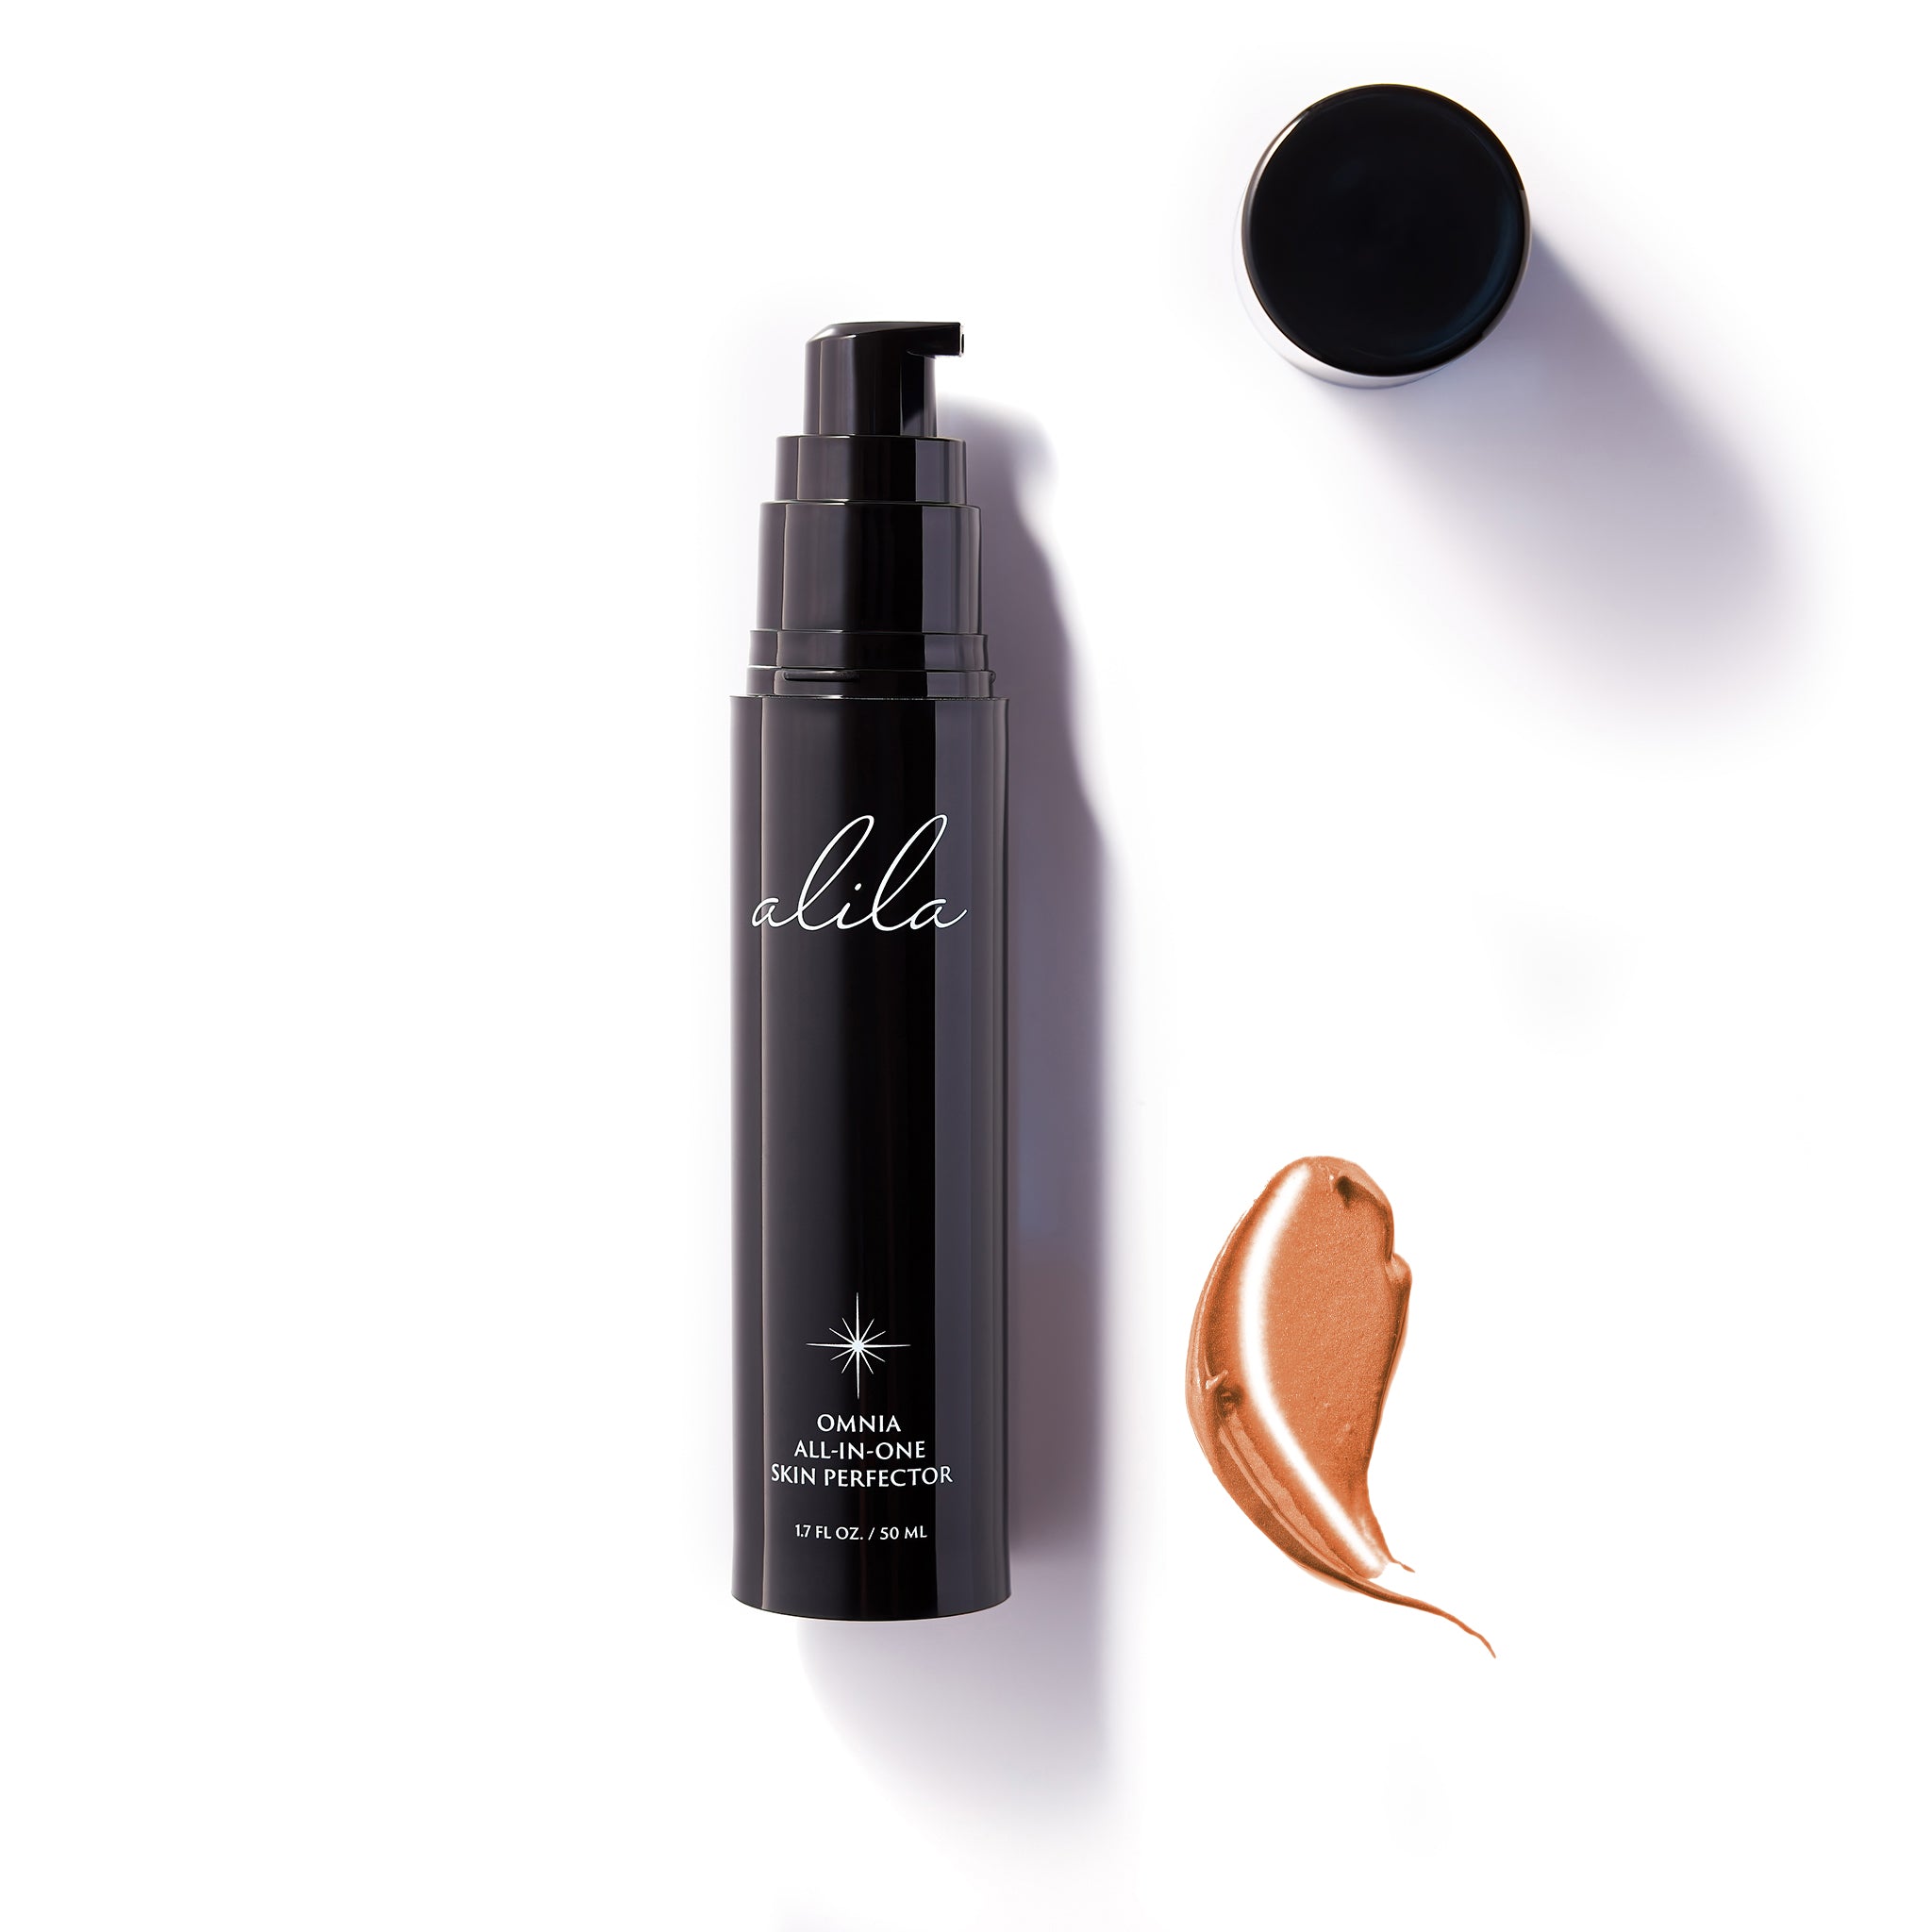 alila beauty omnia all-in-one skin perfector bottle and swatch moisturizer primer bronzer skincare beauty flawless hybrid